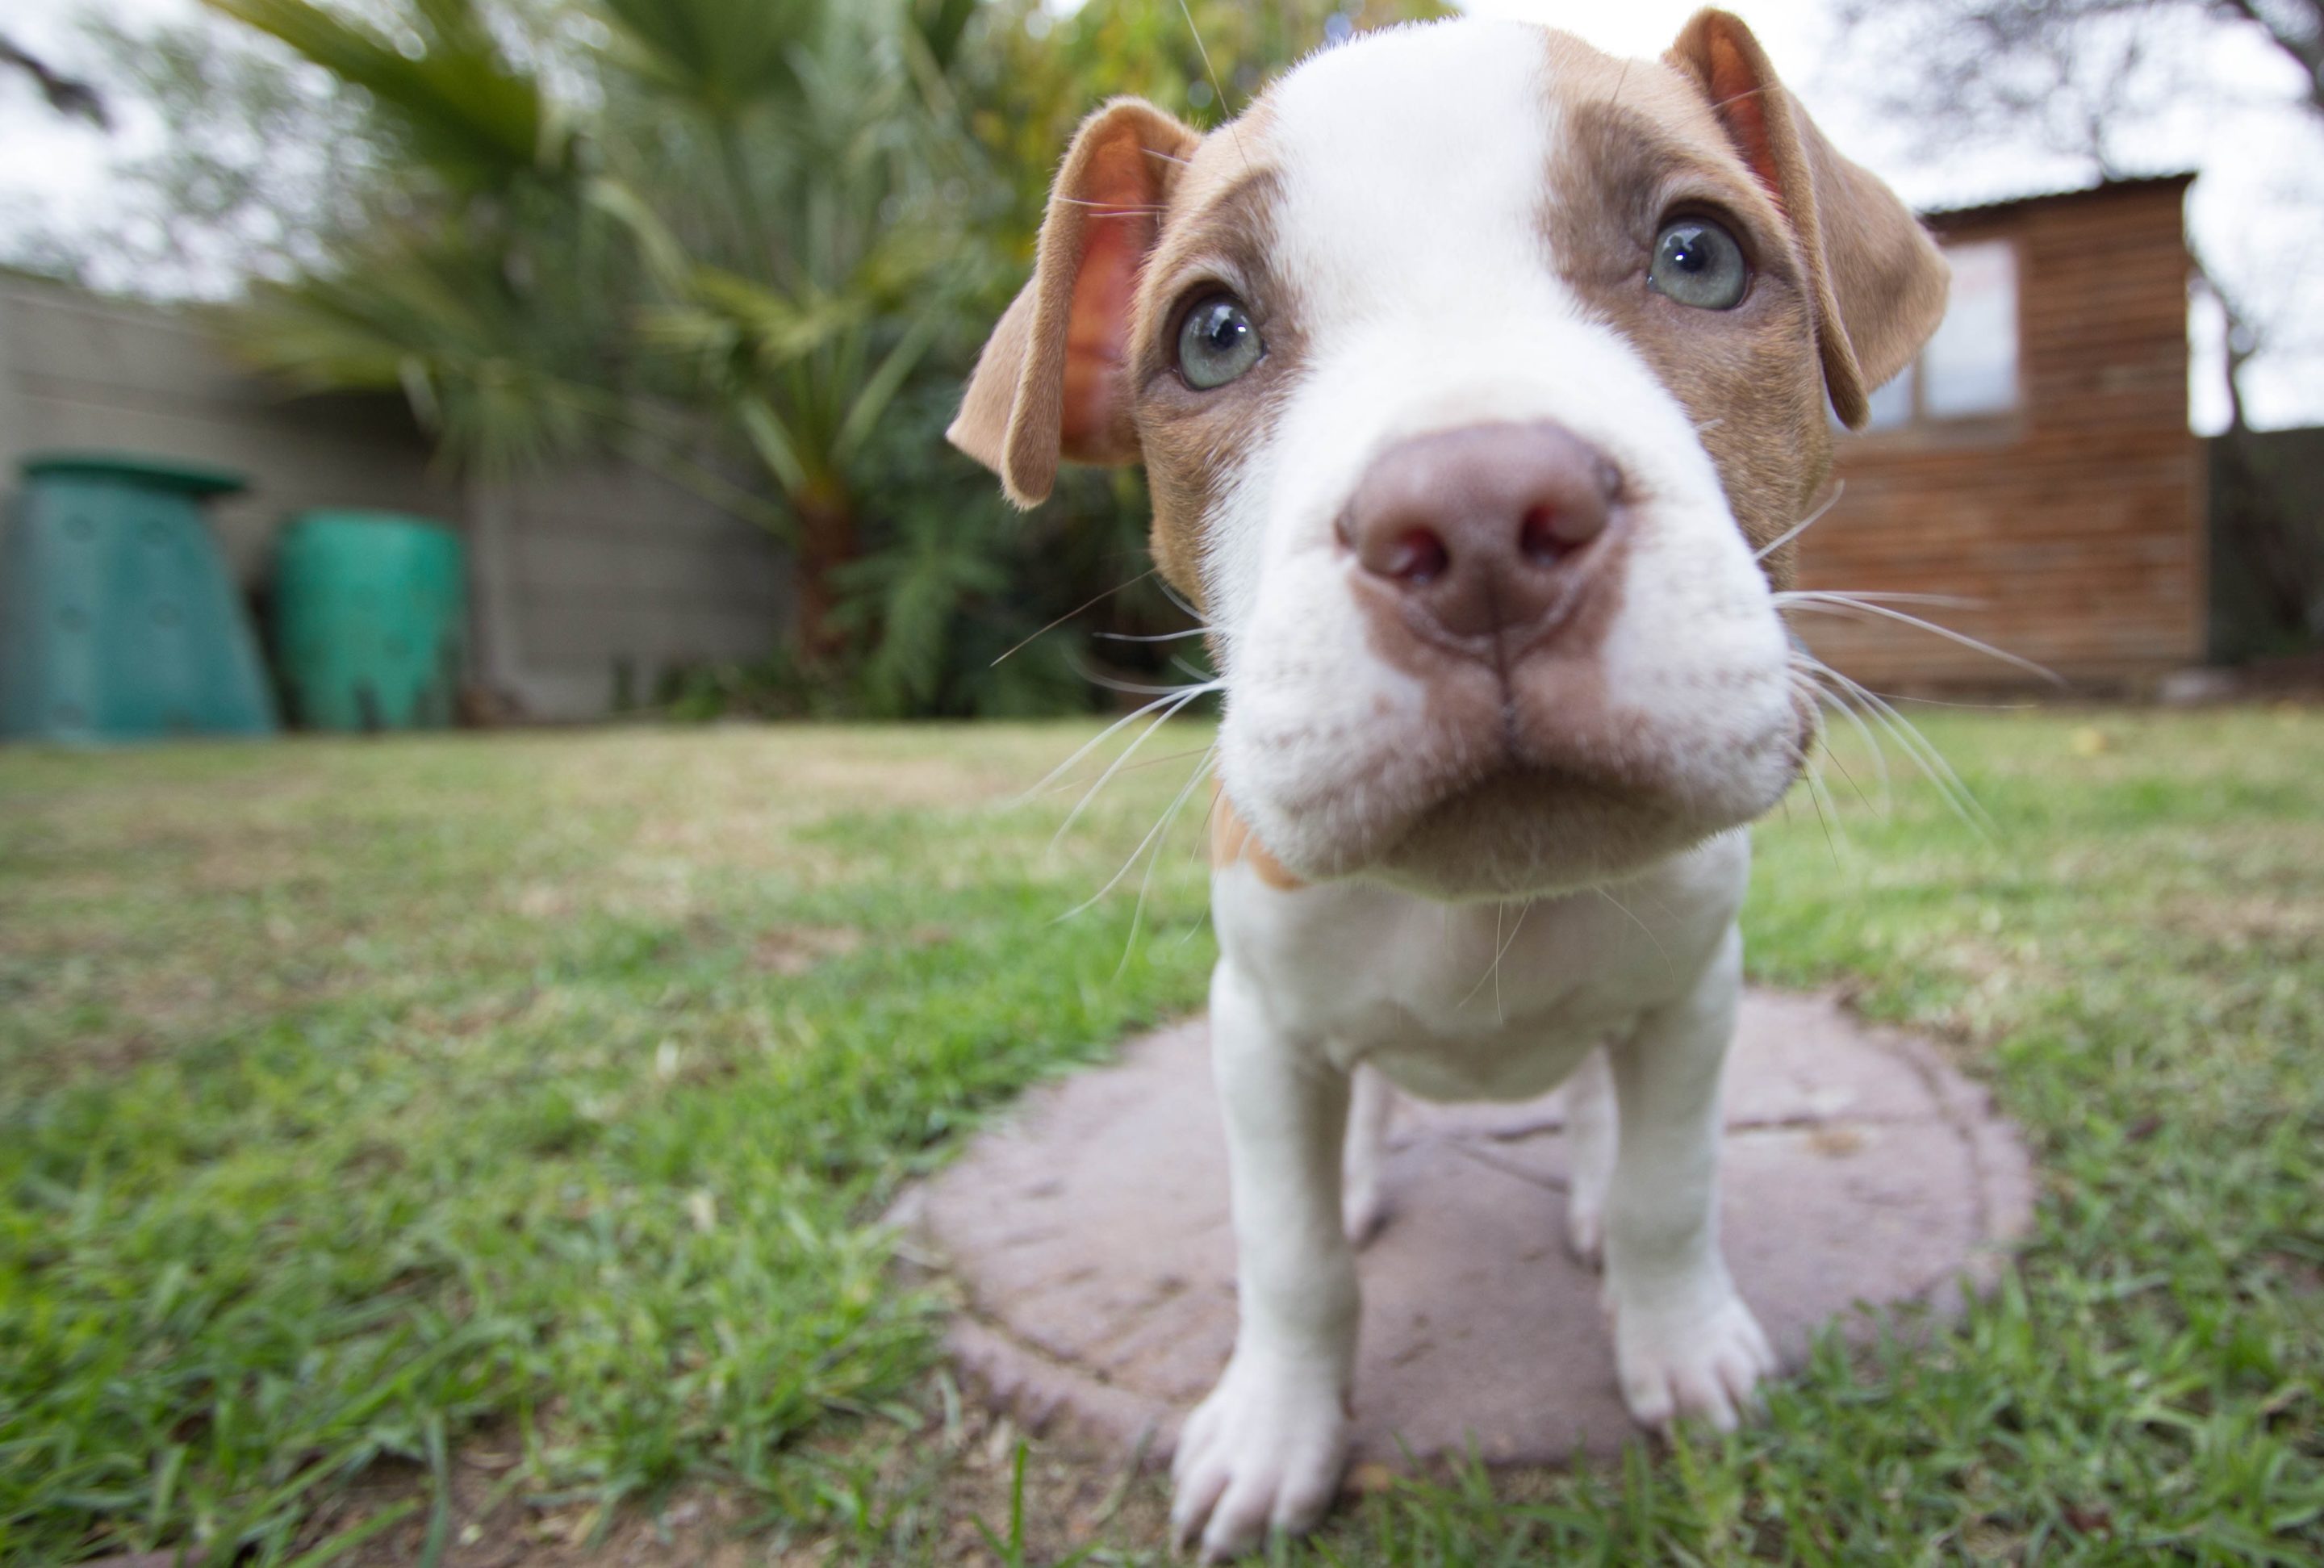 What to Feed Your Puppy: The Basics